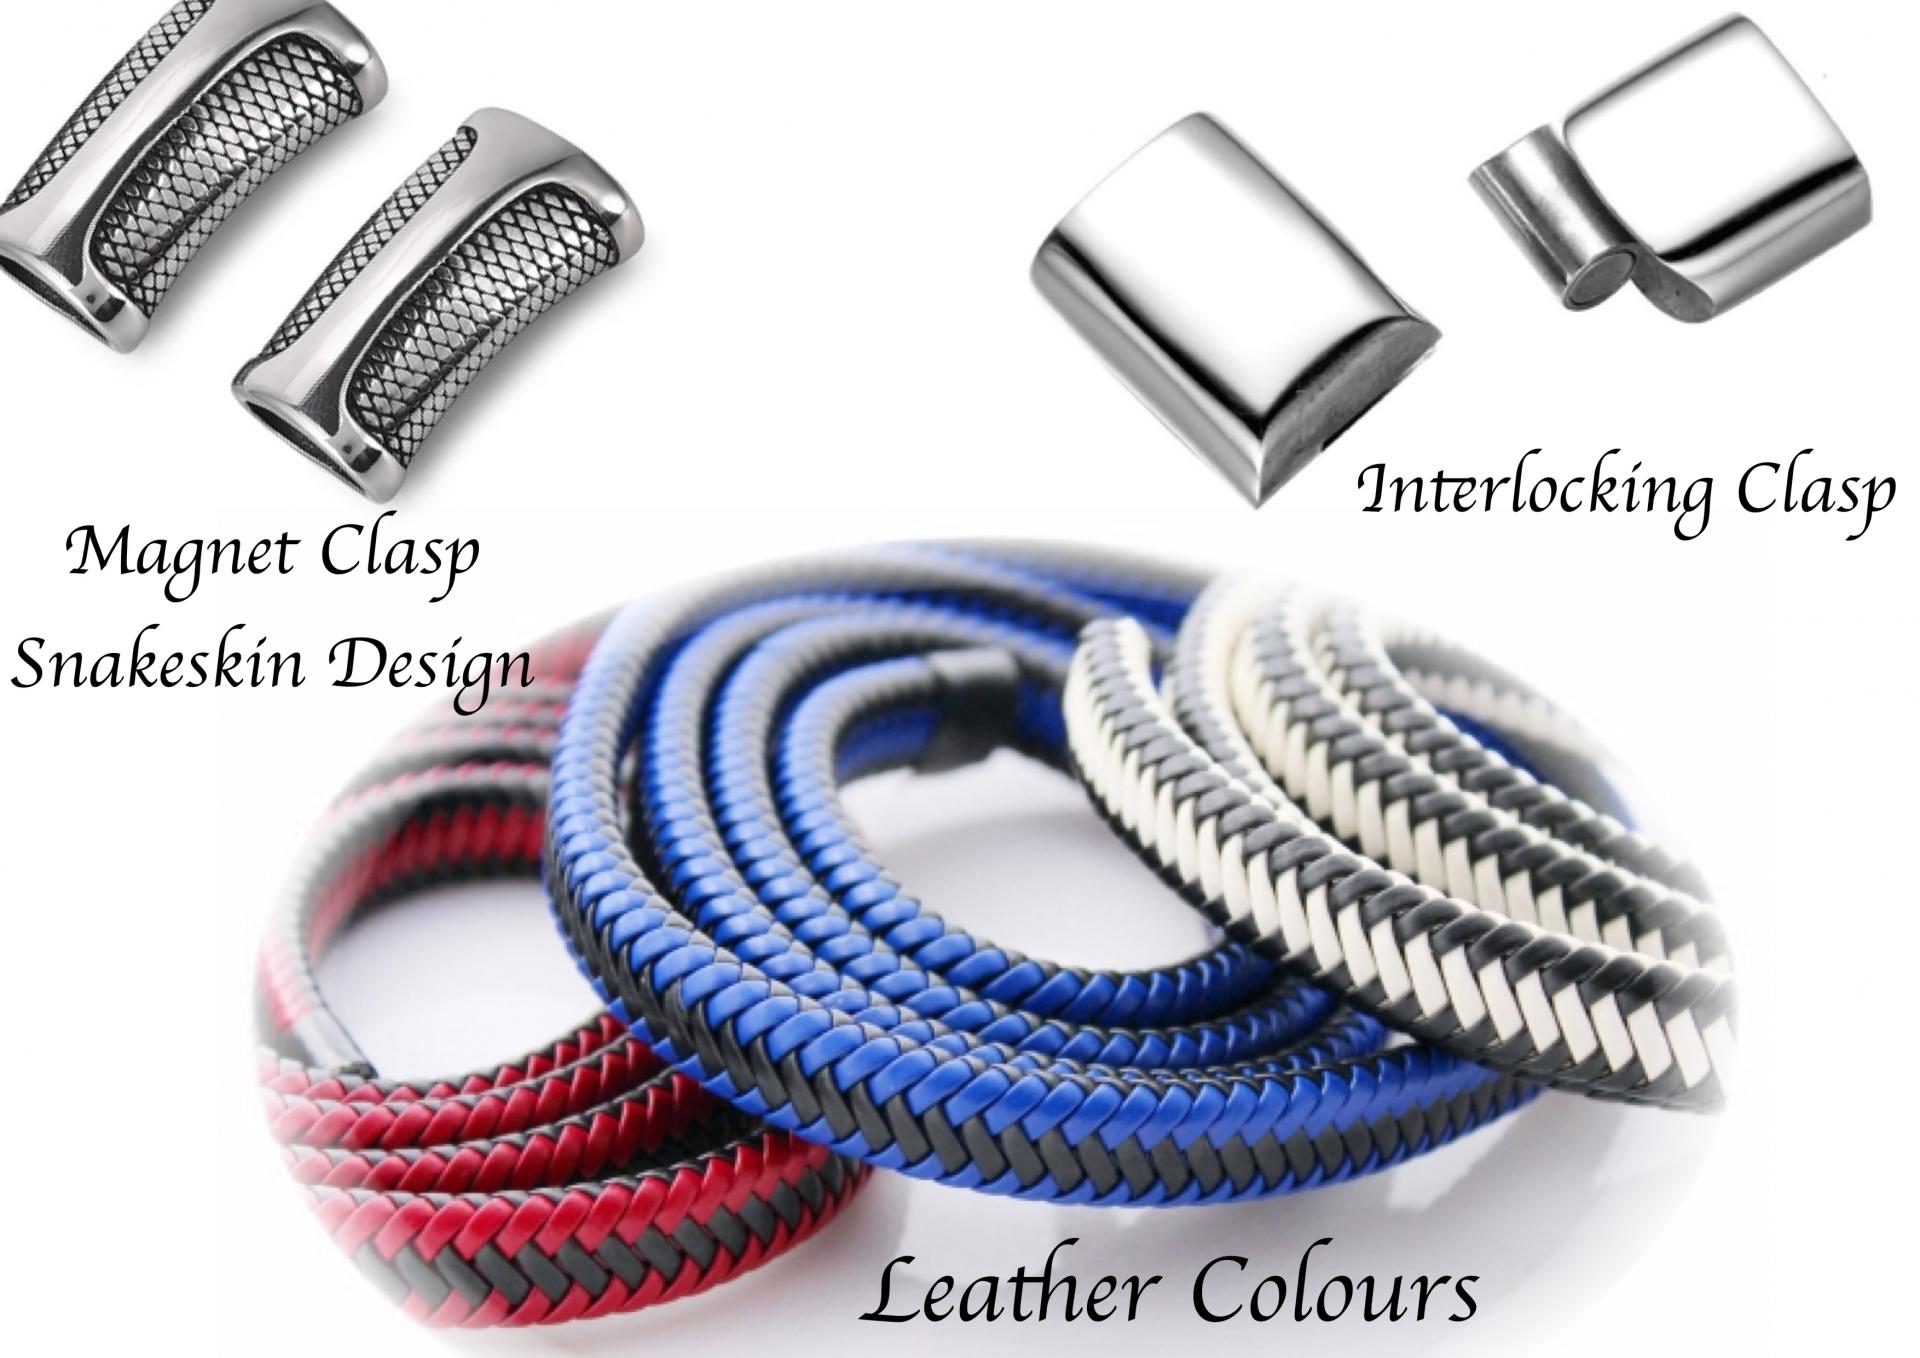 Clasp and Leather Choices